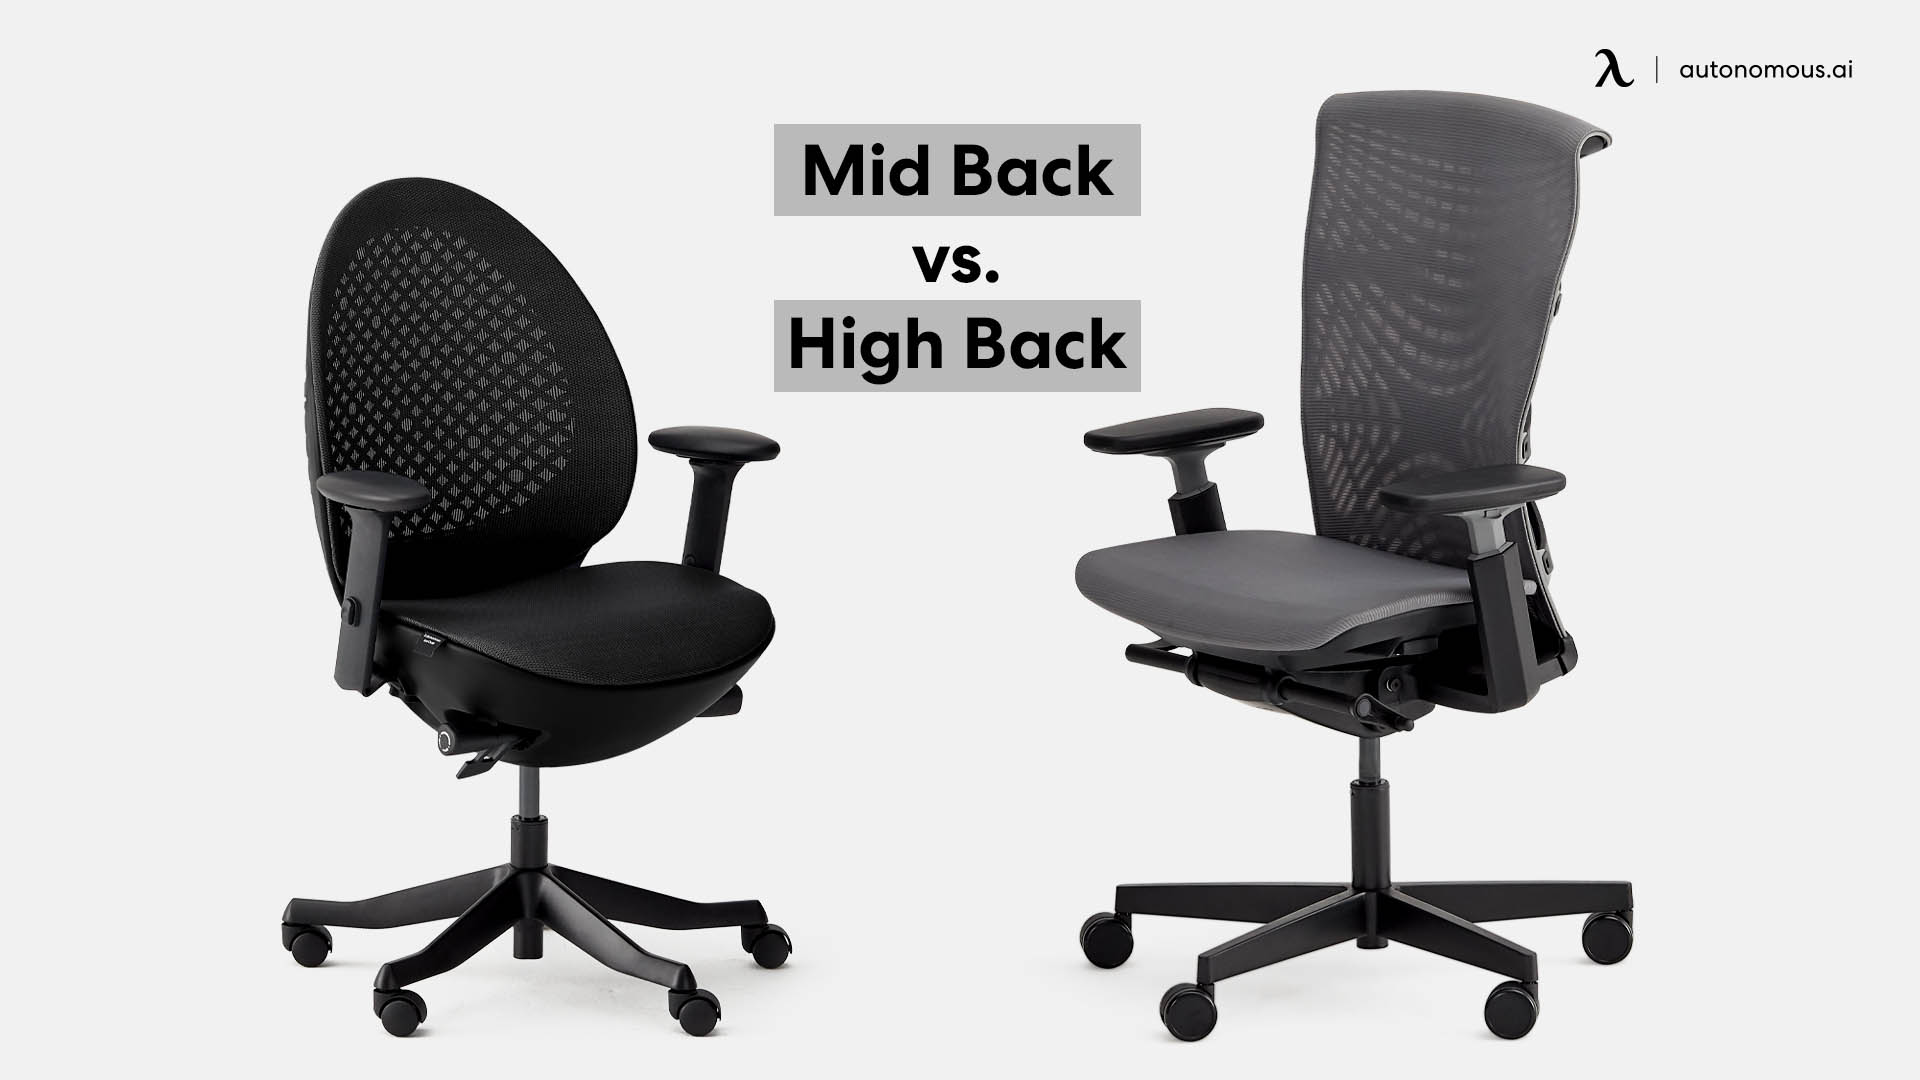 https://cdn.autonomous.ai/static/upload/images/new_post/mid-back-vs-high-back-office-chair-which-one-is-better-1363.jpg